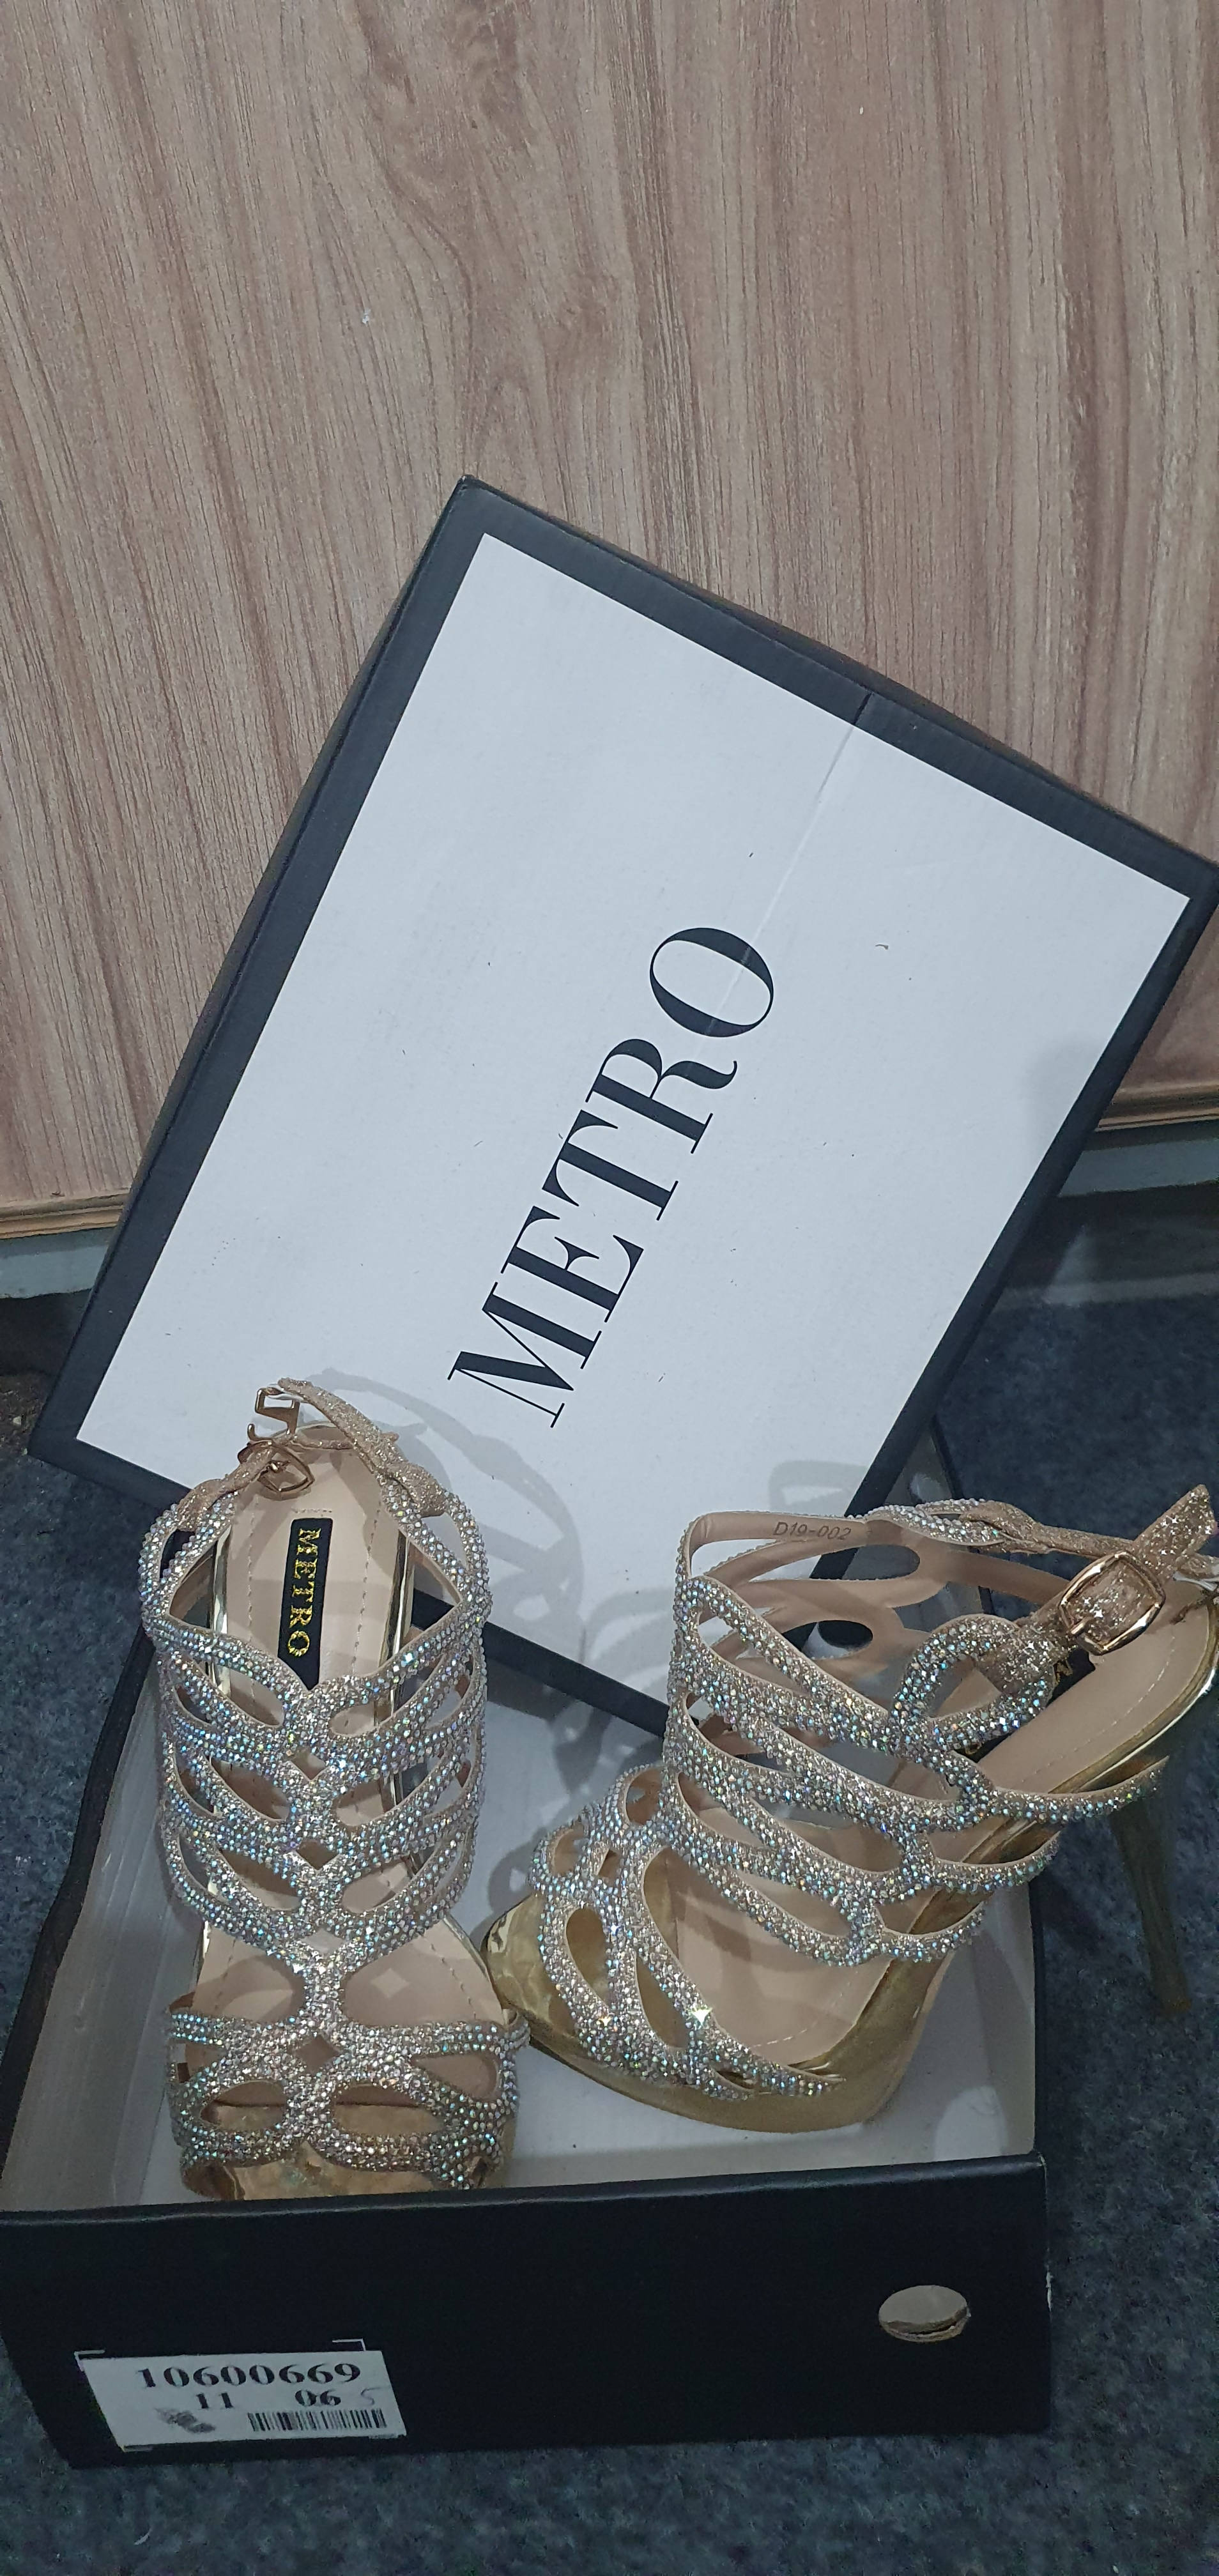 Metro Shoes in Eternity Mall, Lal Bahadur Shastri Marg, Thane | 3 people  Reviewed - AskLaila